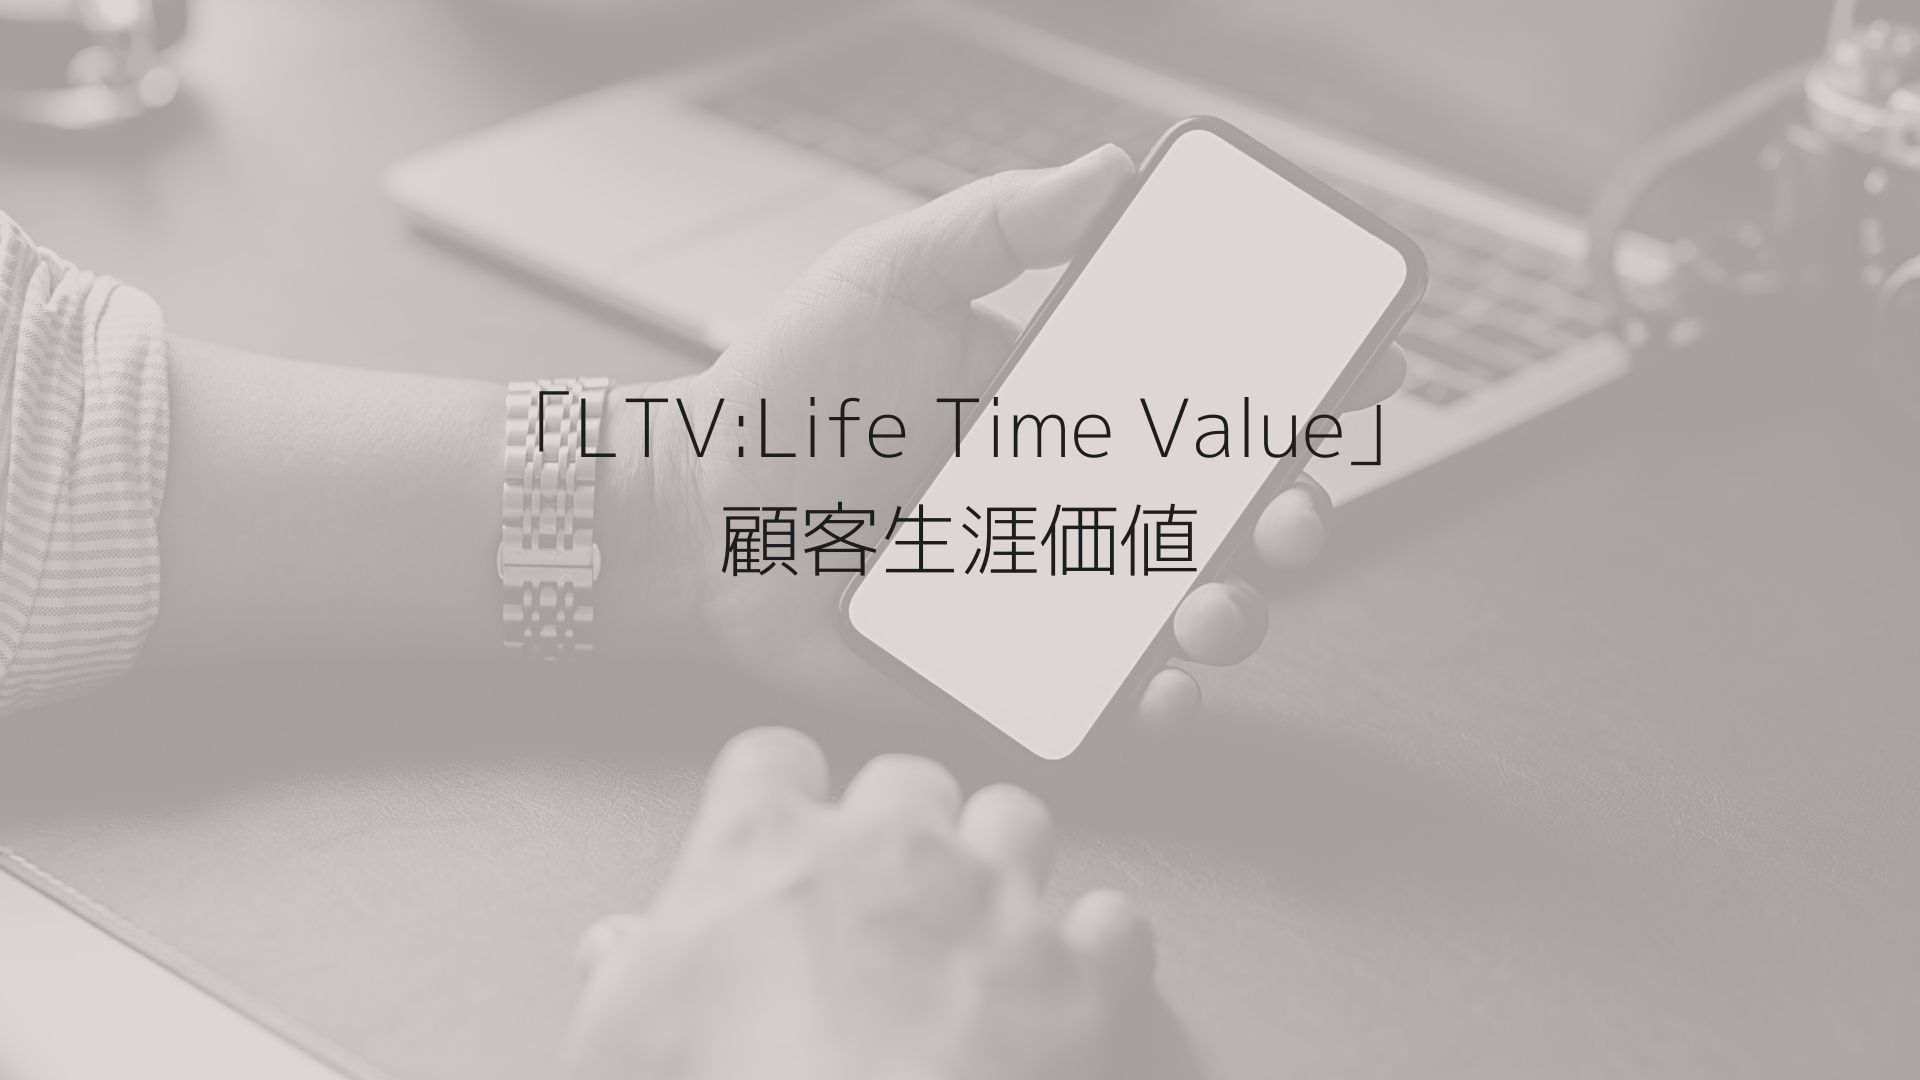 LTV（Life Time Value：顧客生涯価値）とは